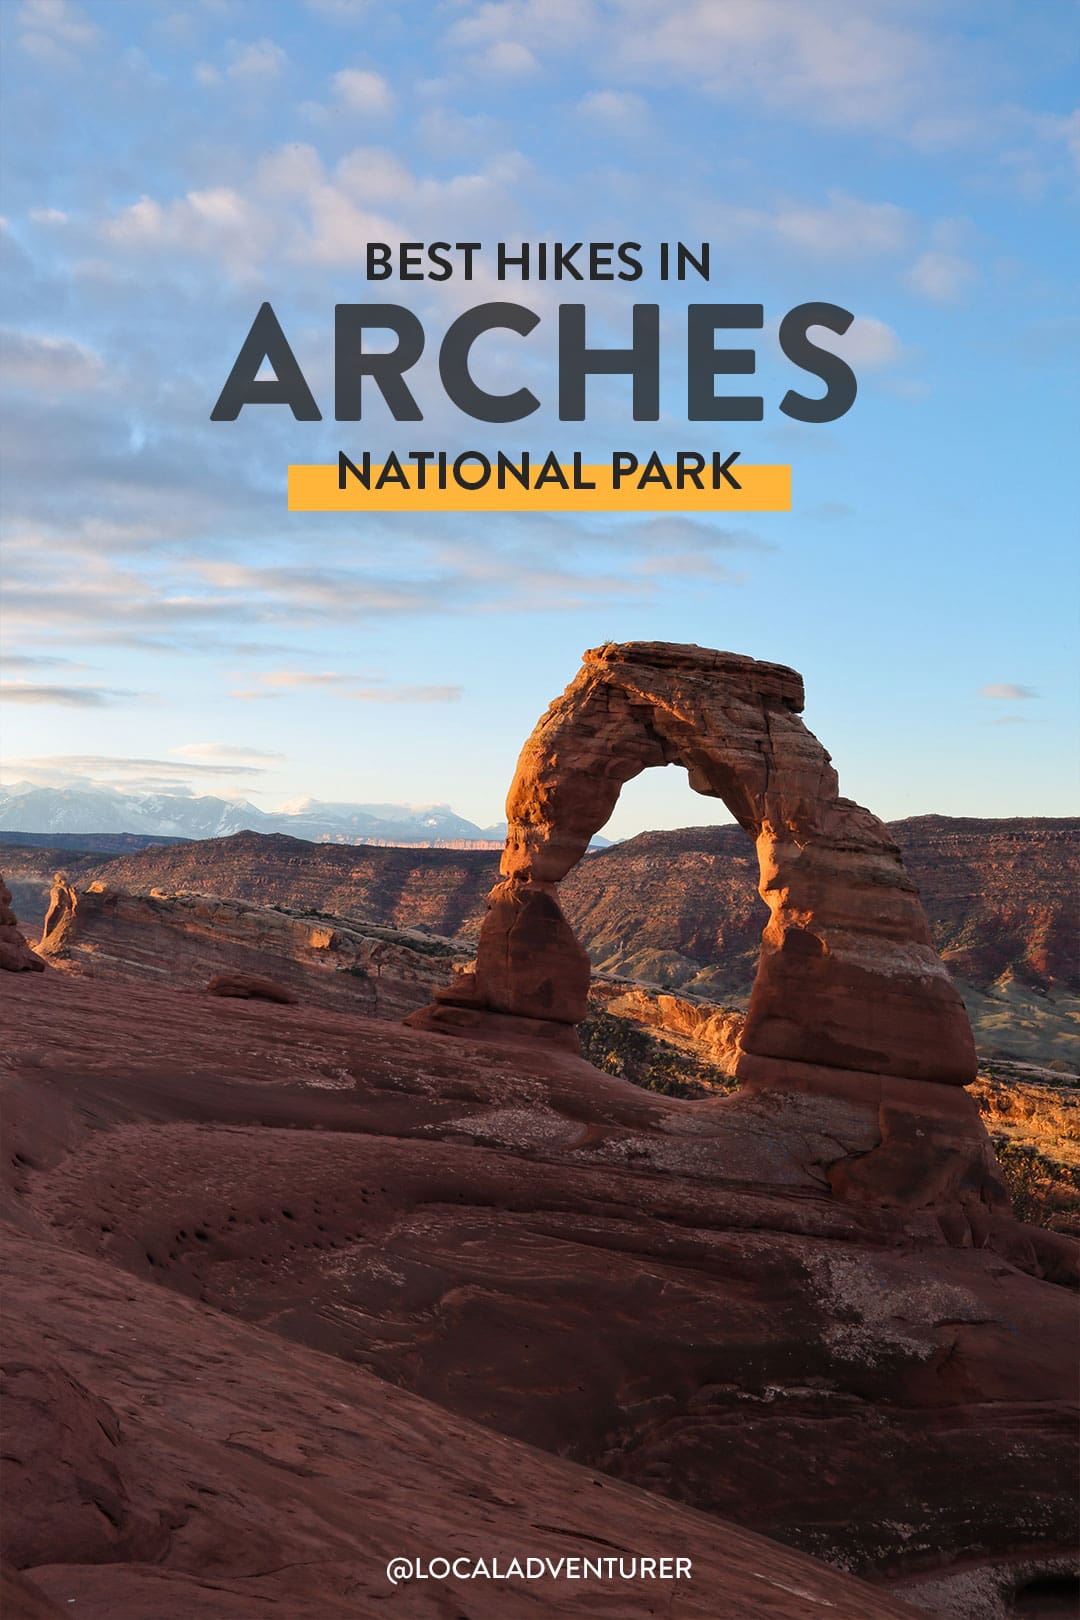 11 Best Hikes in Arches National Park